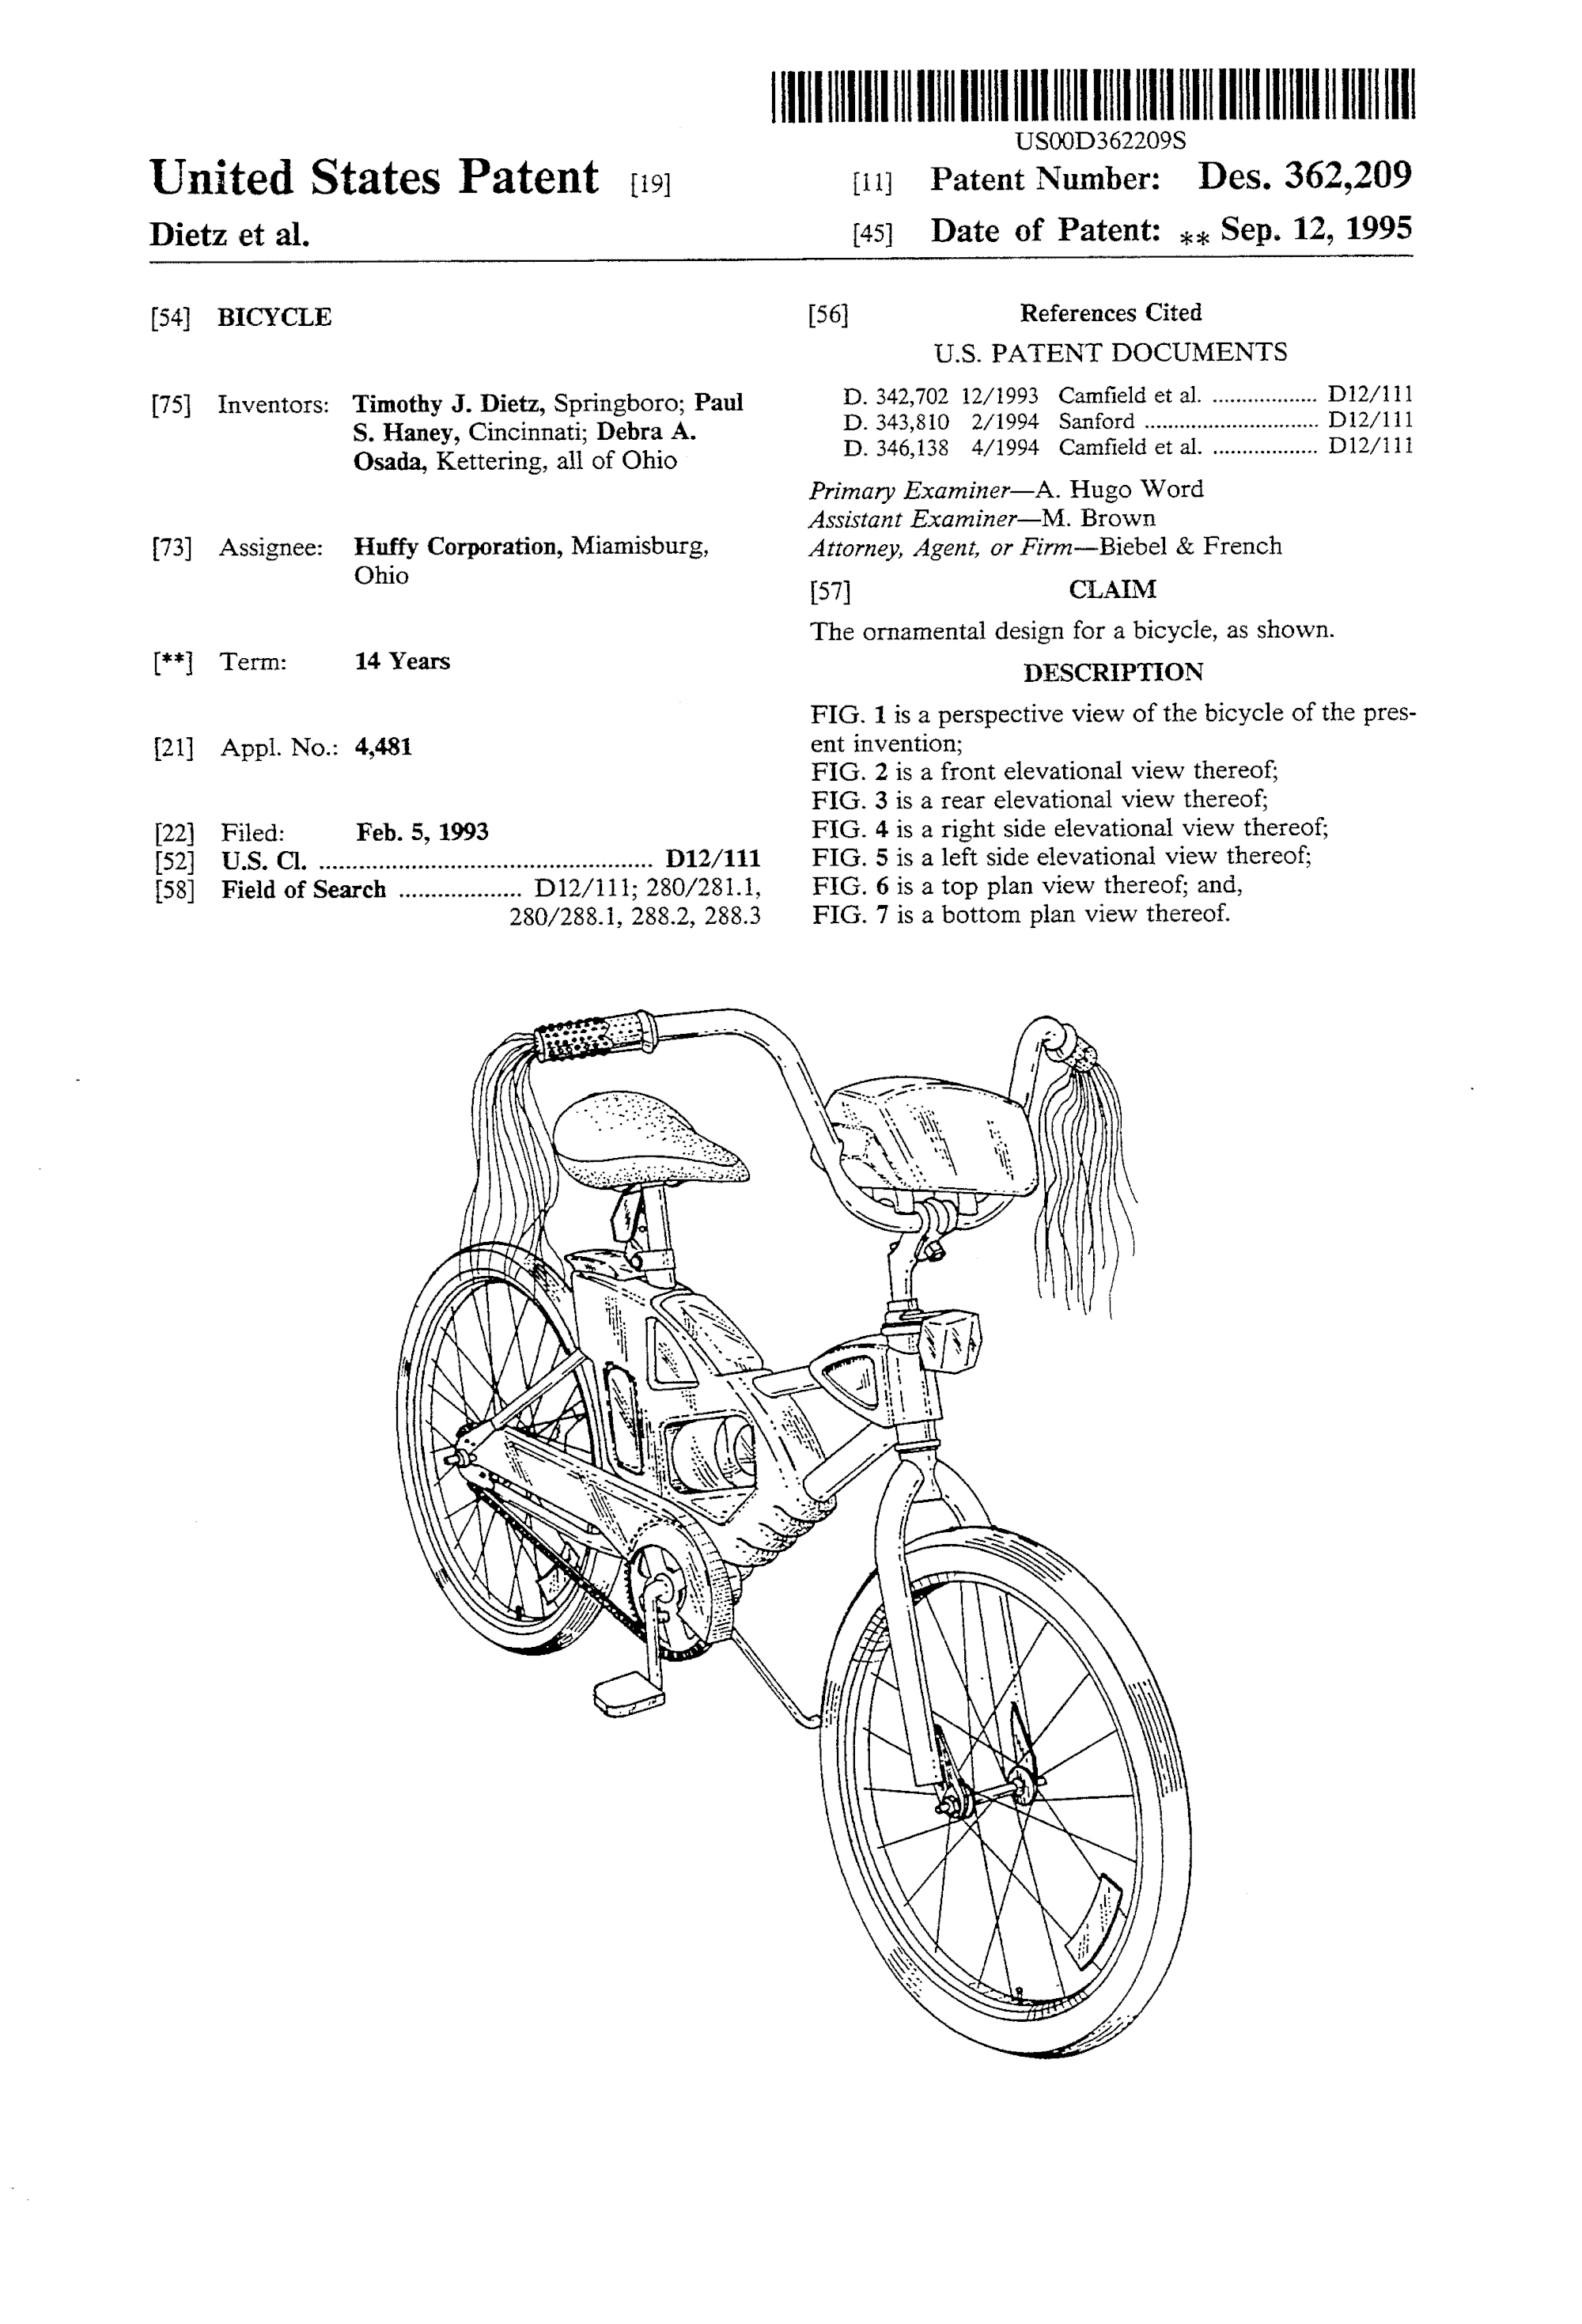 Bicycle, Timothy J. Dietz, Paul S. Haney, Debra A. Osada, for Huffy Corporation, 1993/1995. Patent Number: USD 362,209, U.S Patent Office